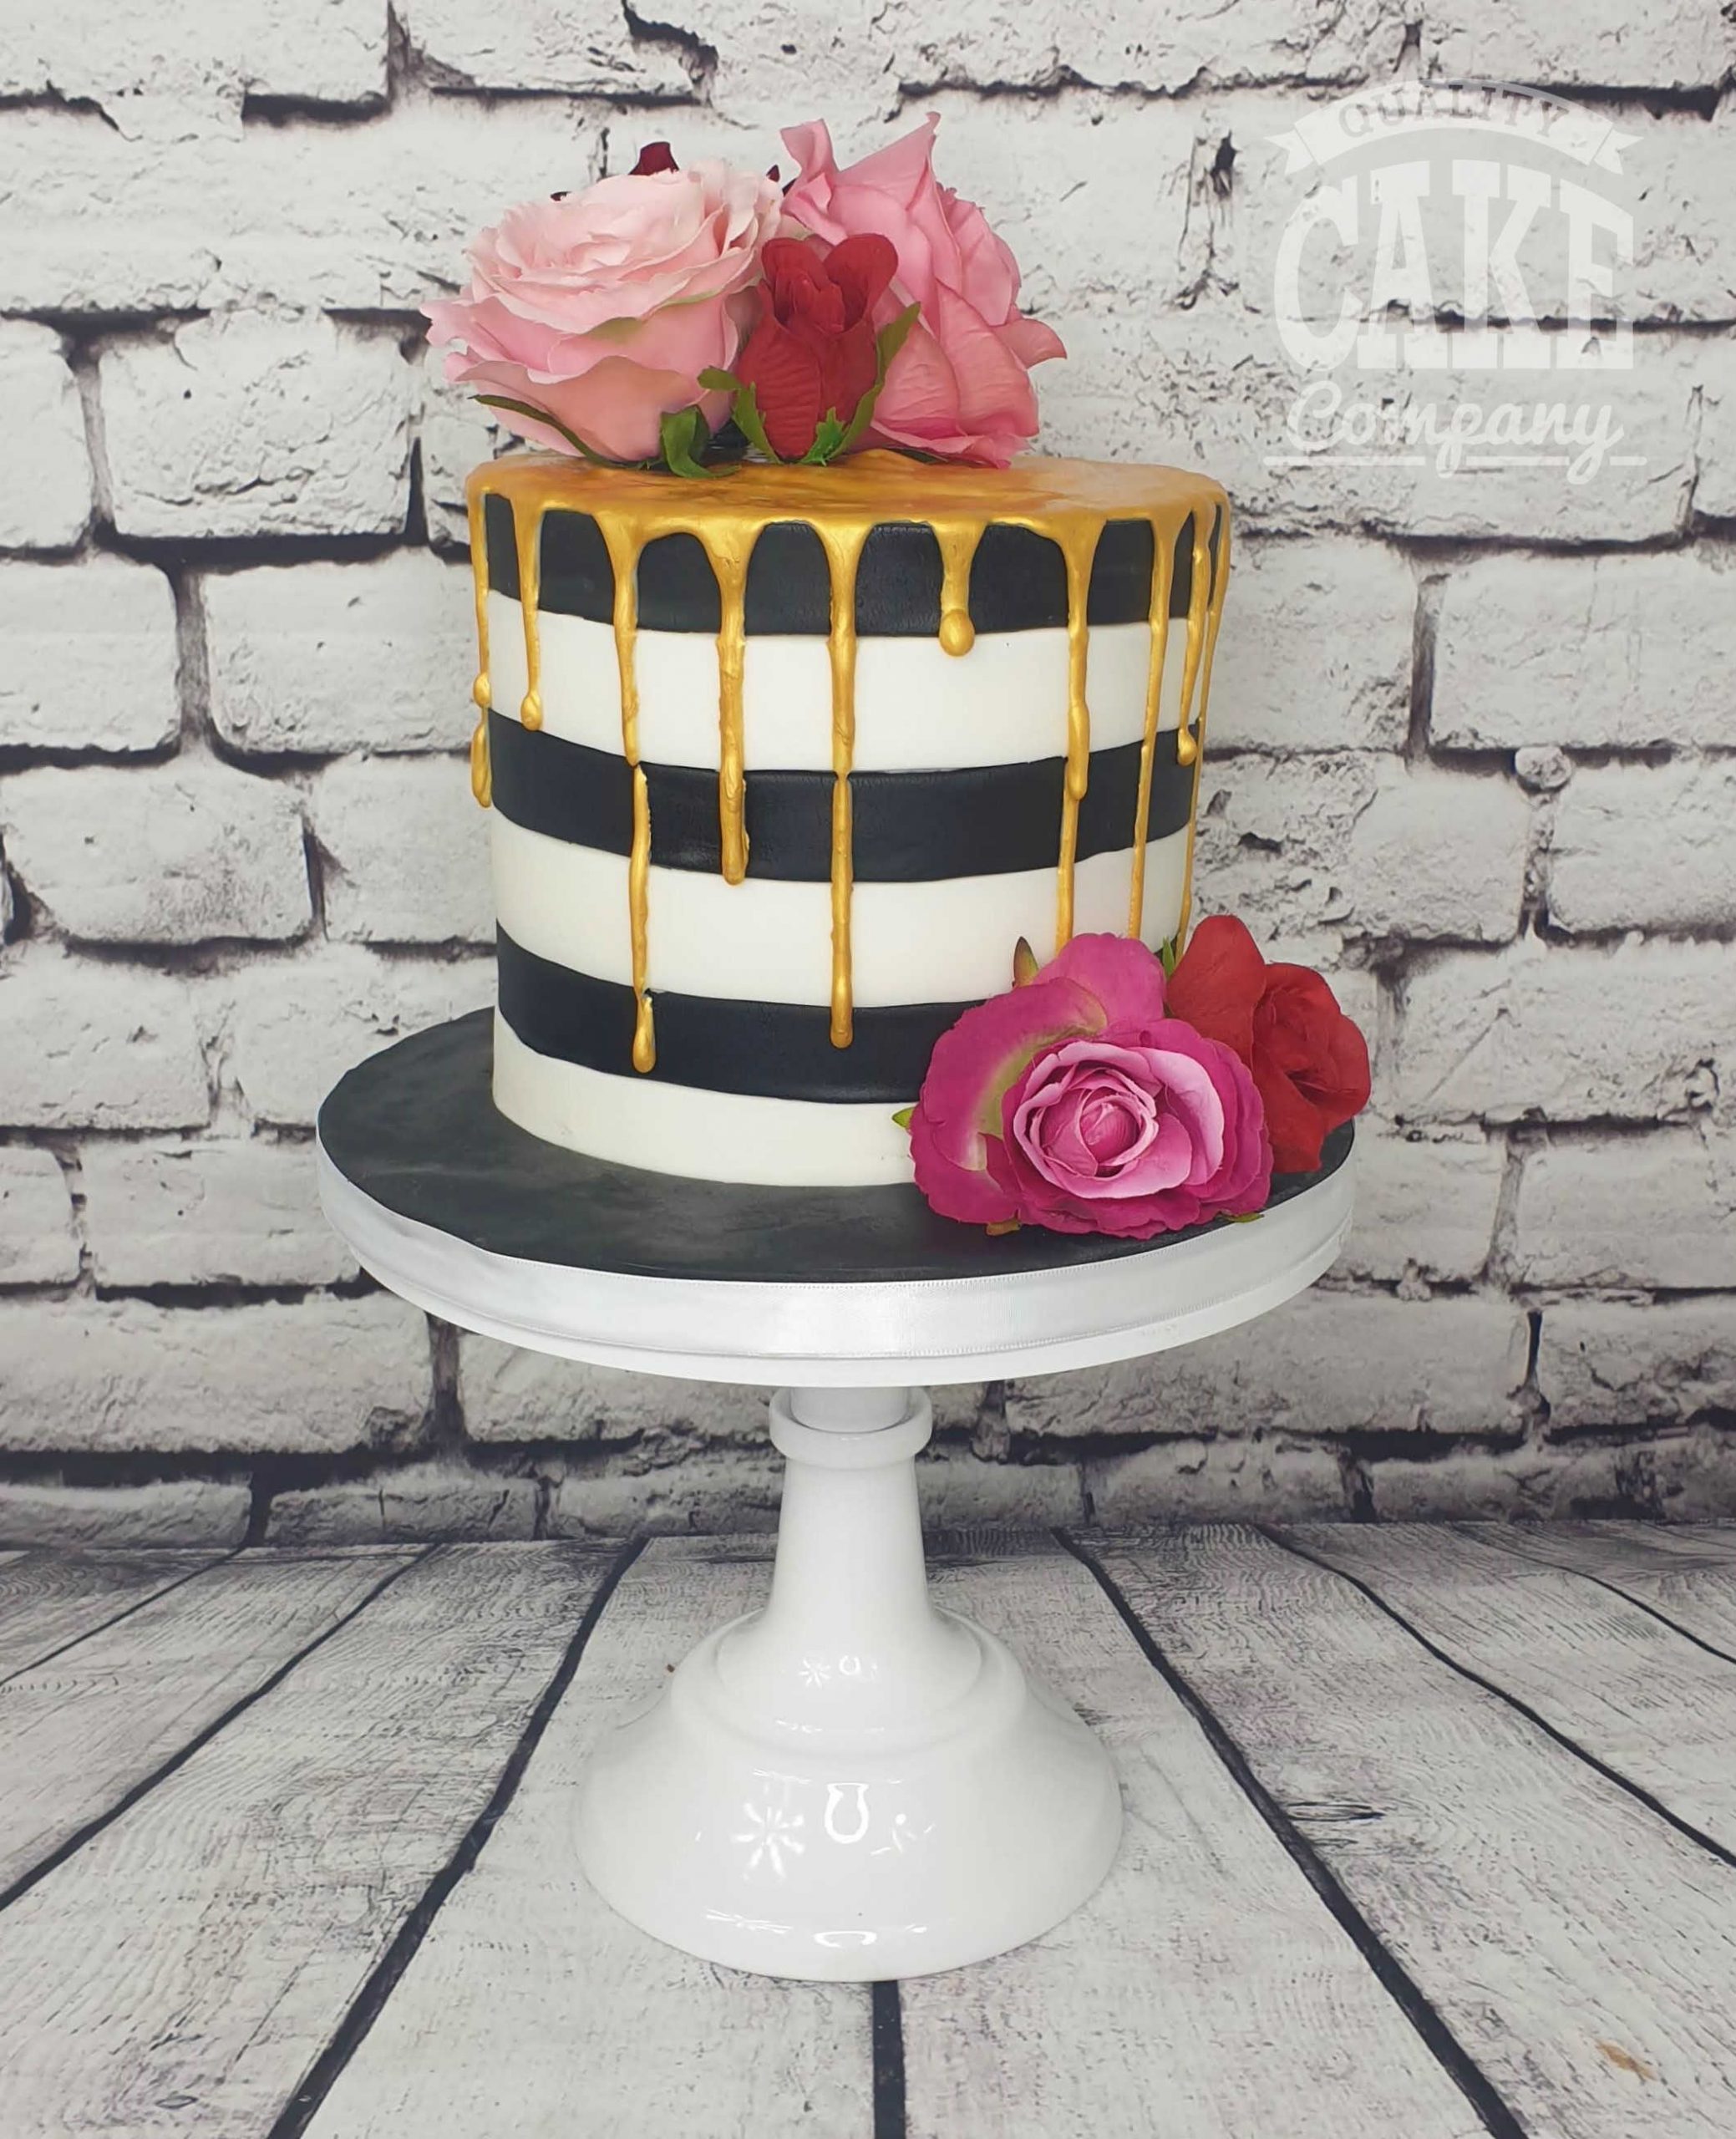 Black and purple theme cake with fondant flowers and gold drip .